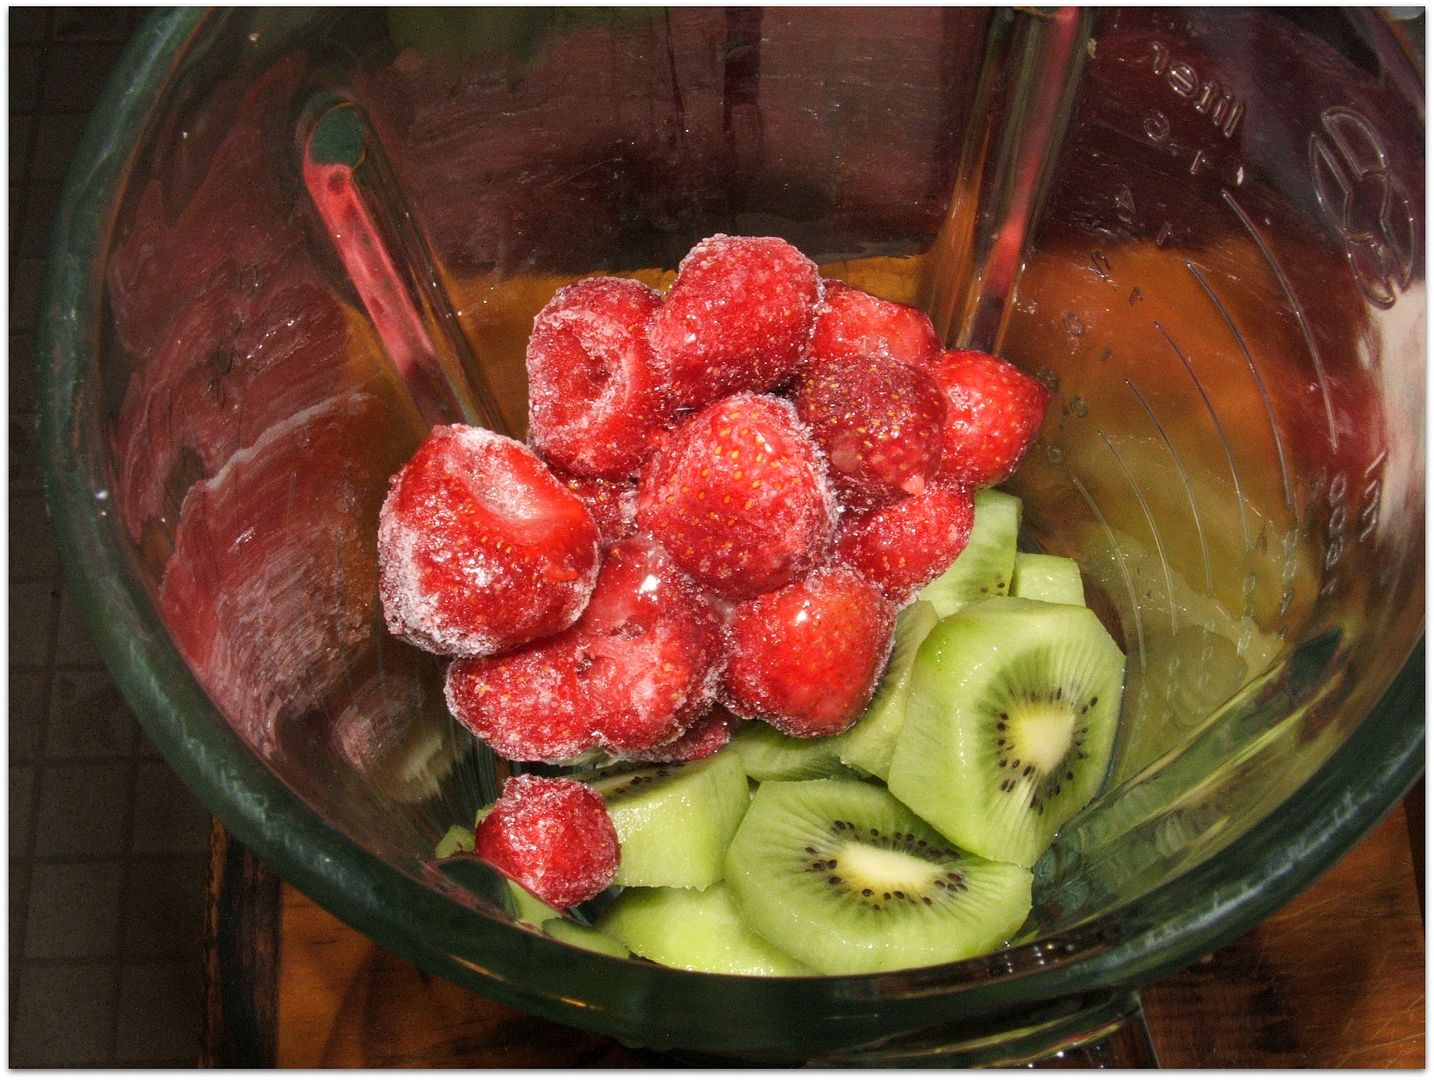 Frozen Strawberry & Kiwi-Banana Smoothie by Angie Ouellette-Tower photo 003_zpsabf4dfd3.jpg